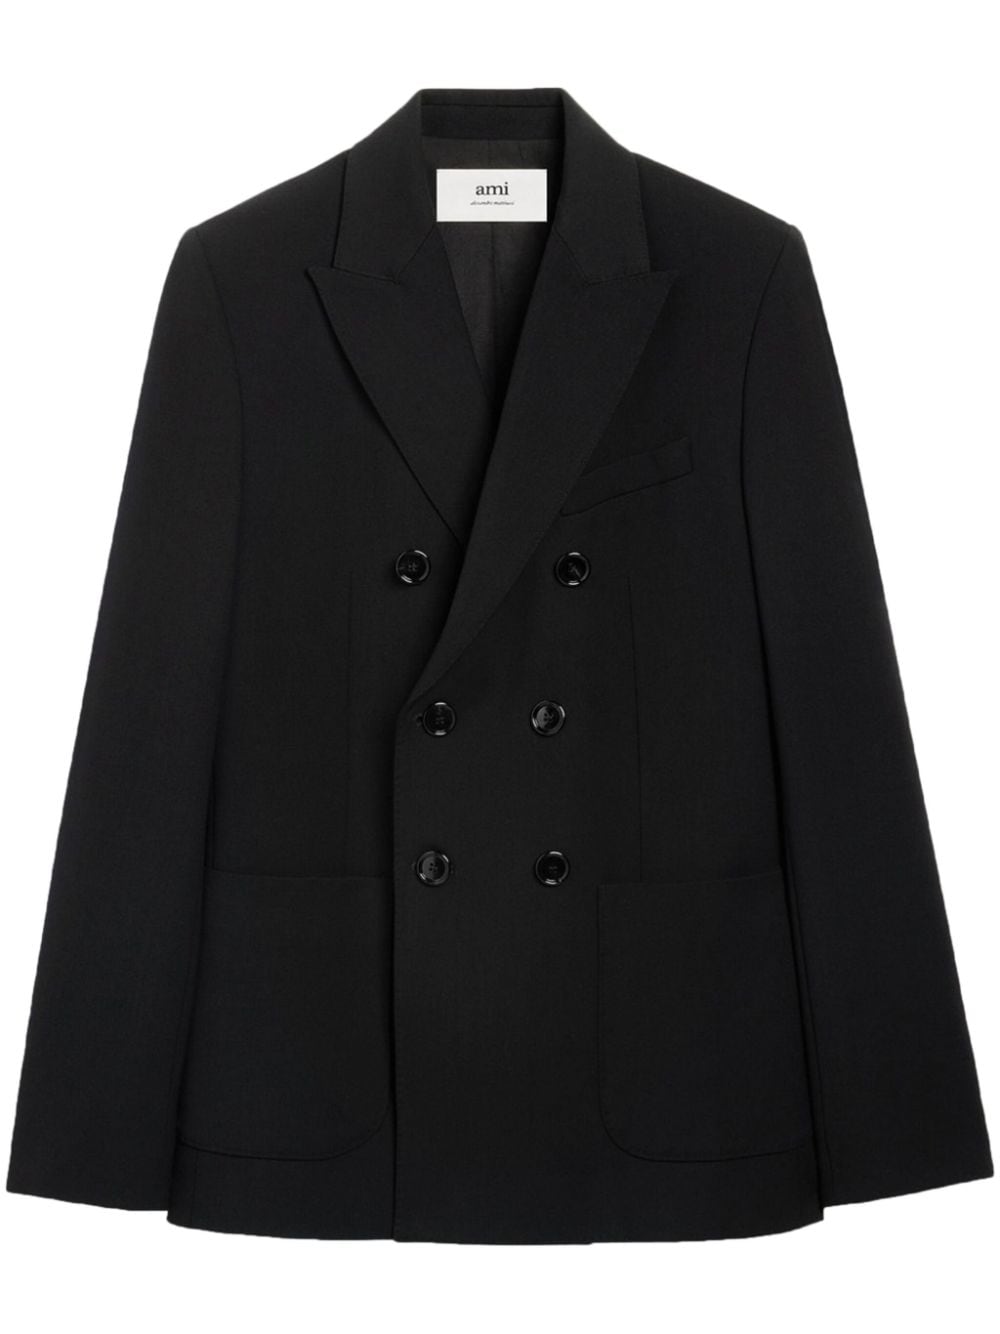 AMI PARIS Stylish and Sophisticated Women's American-Inspired Black Coat for the SS24 Season